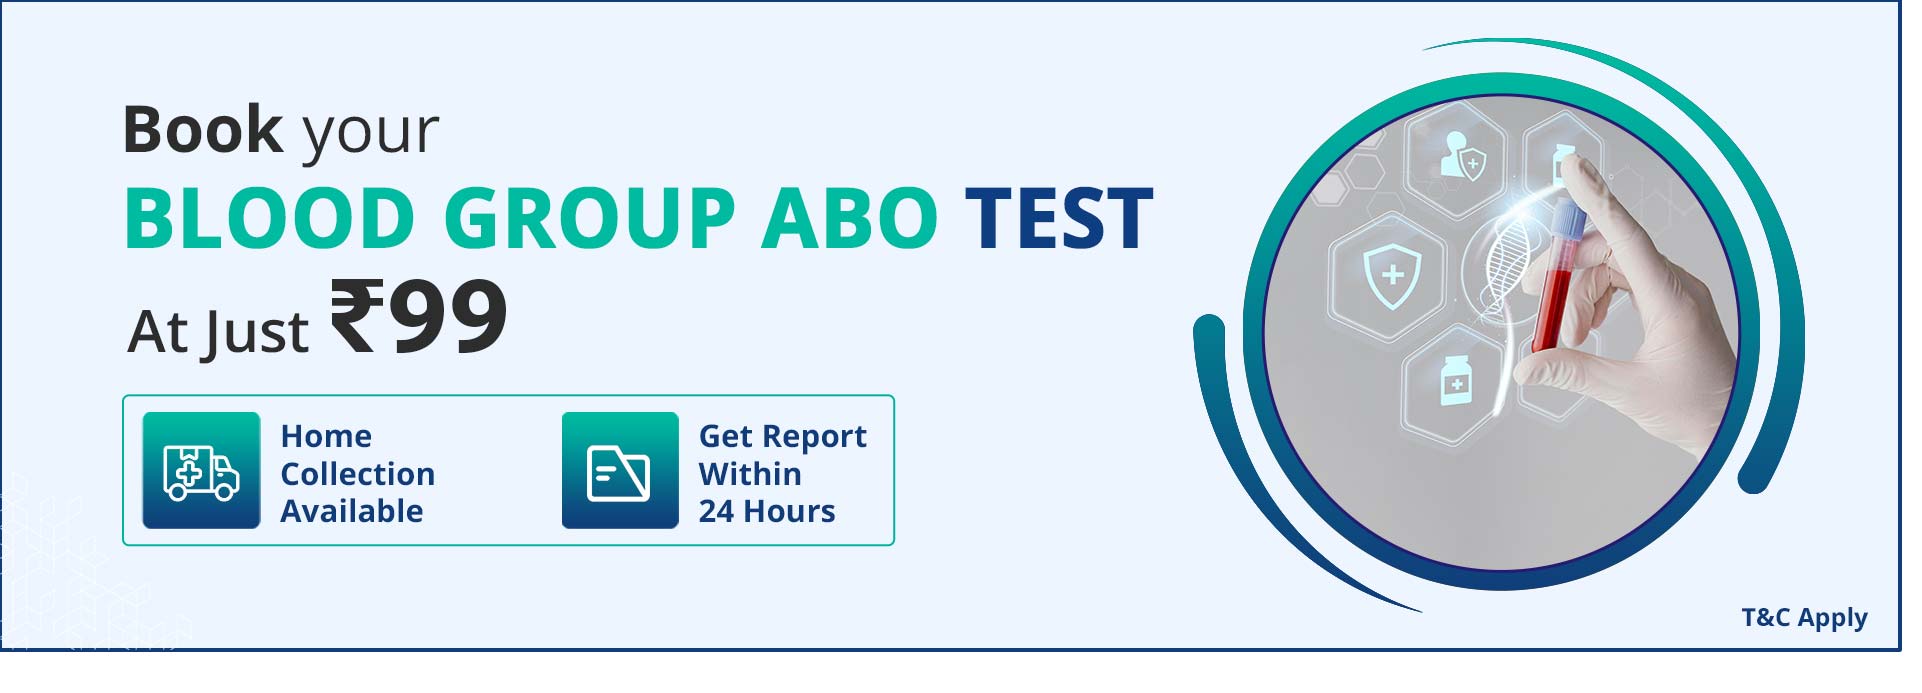 Blood group ABO Test